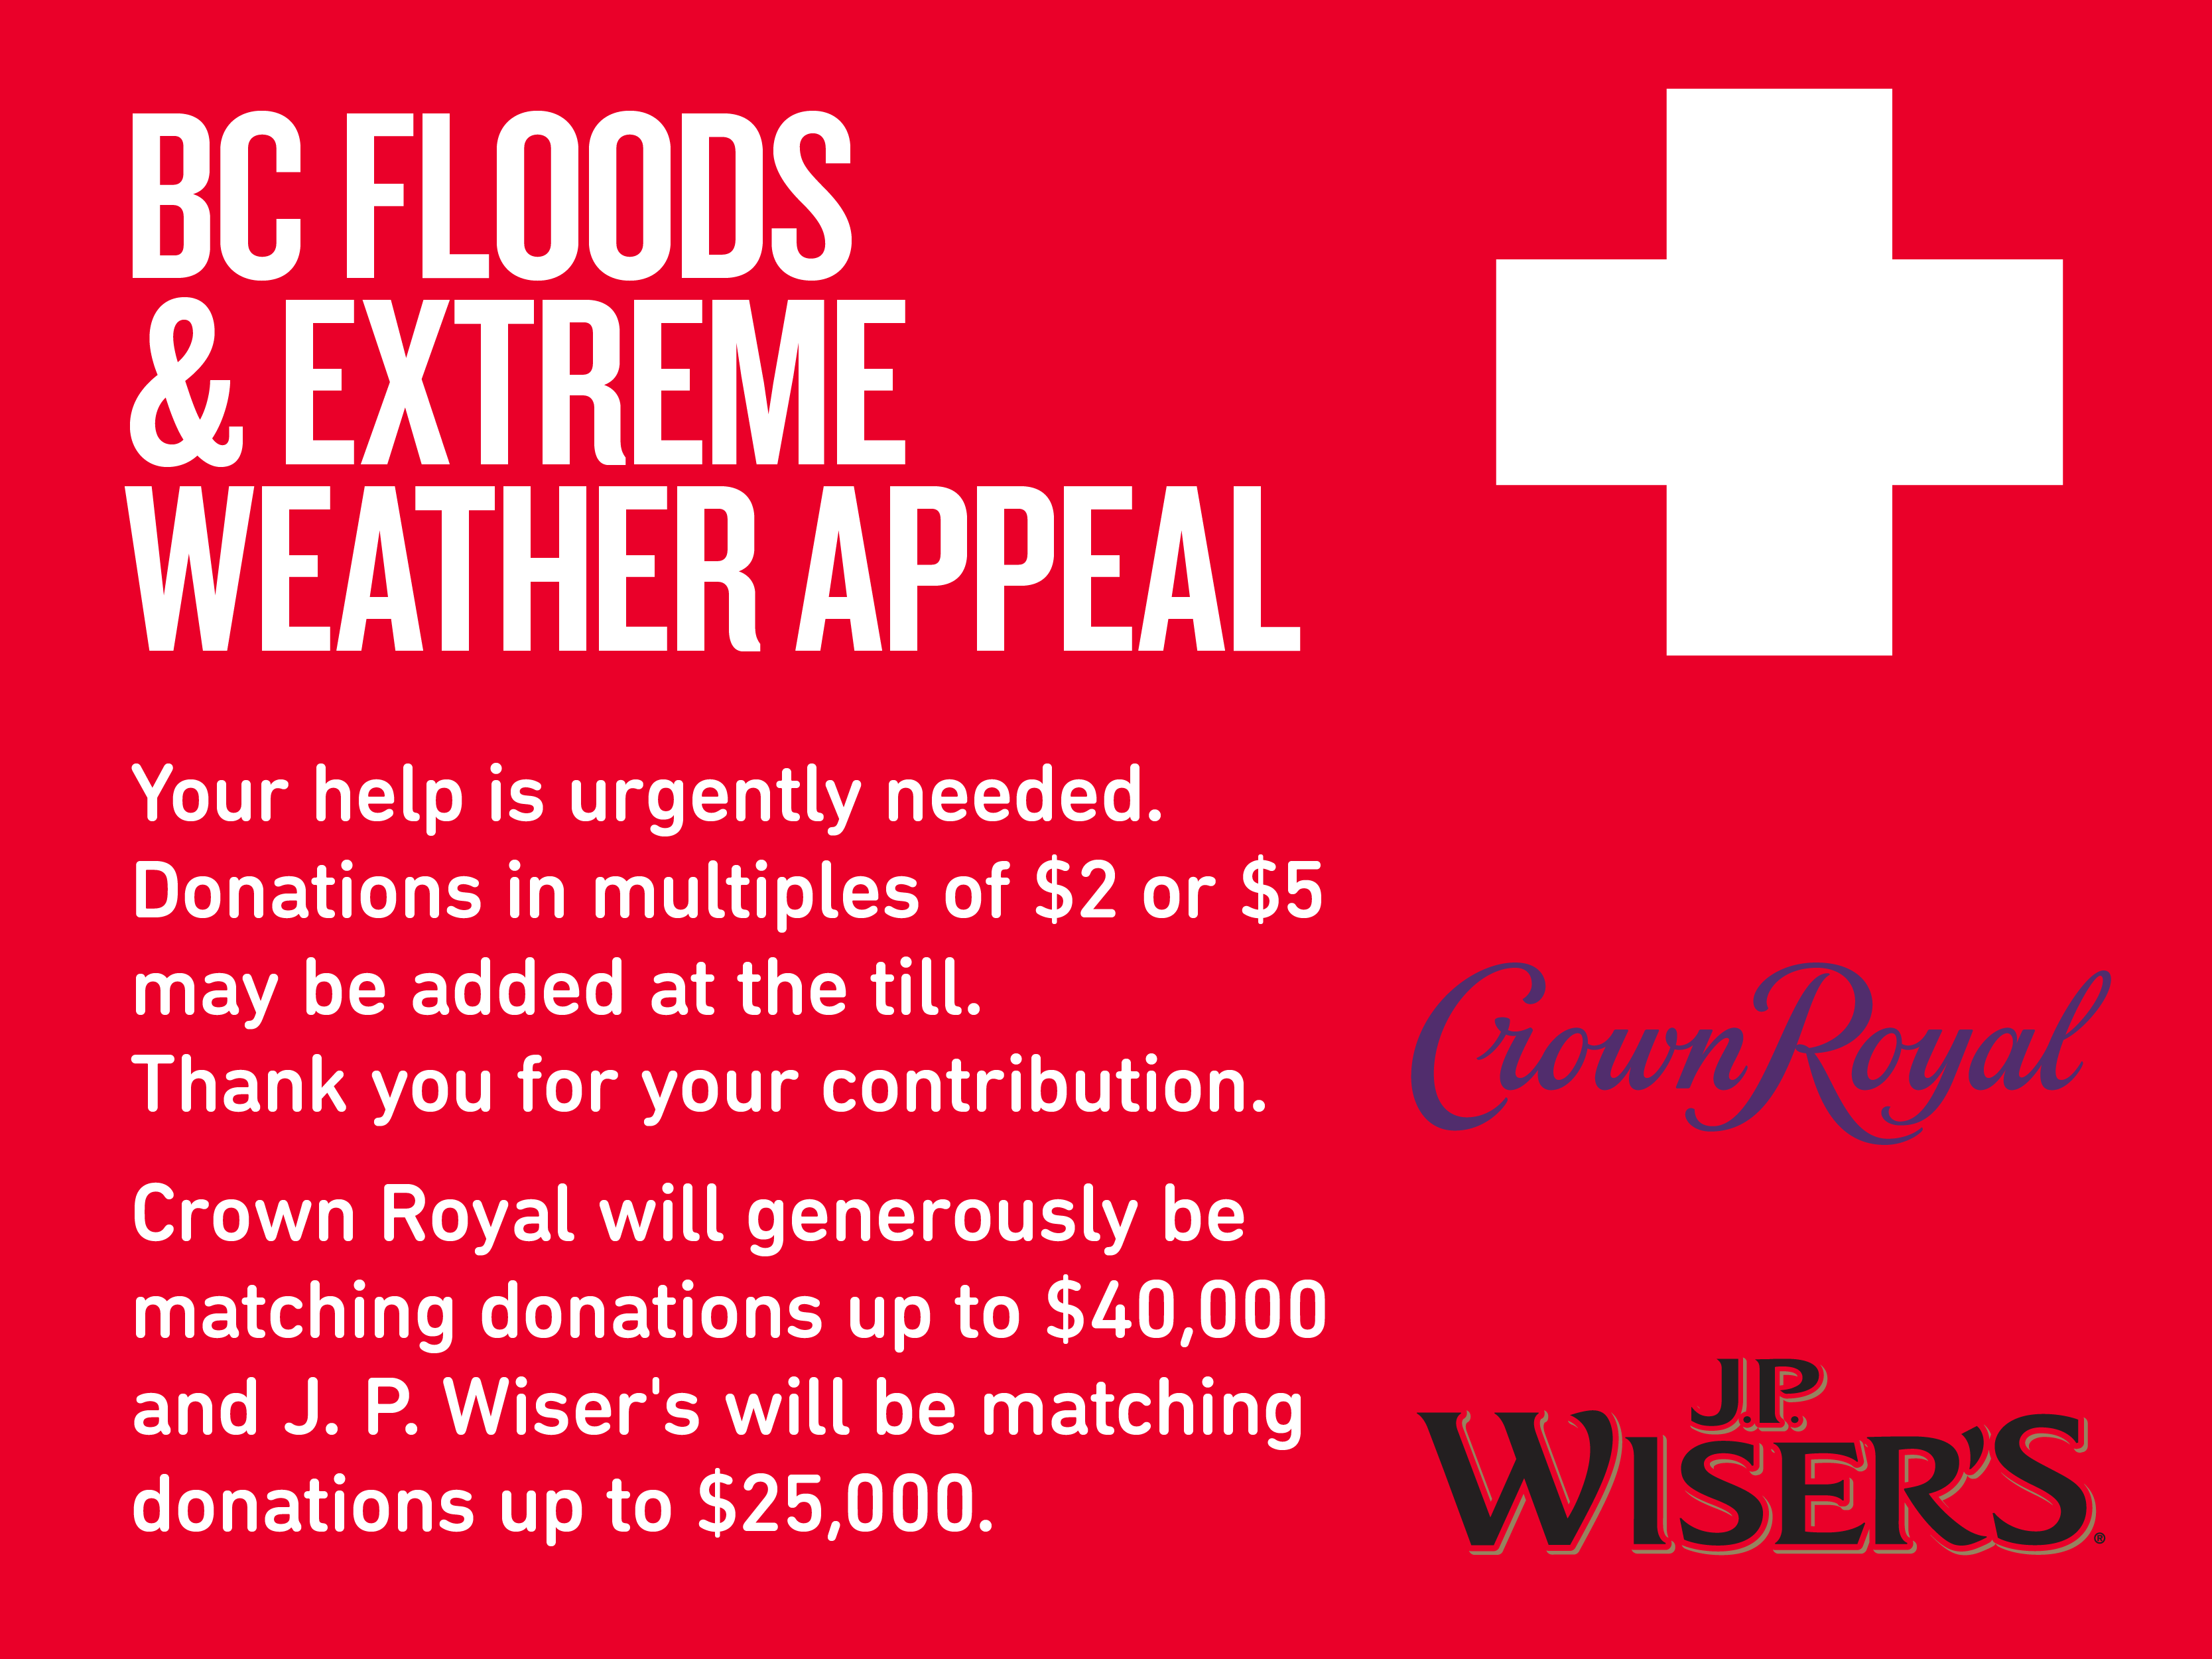 BC FLOODS & EXTREME WEATHER APPEAL